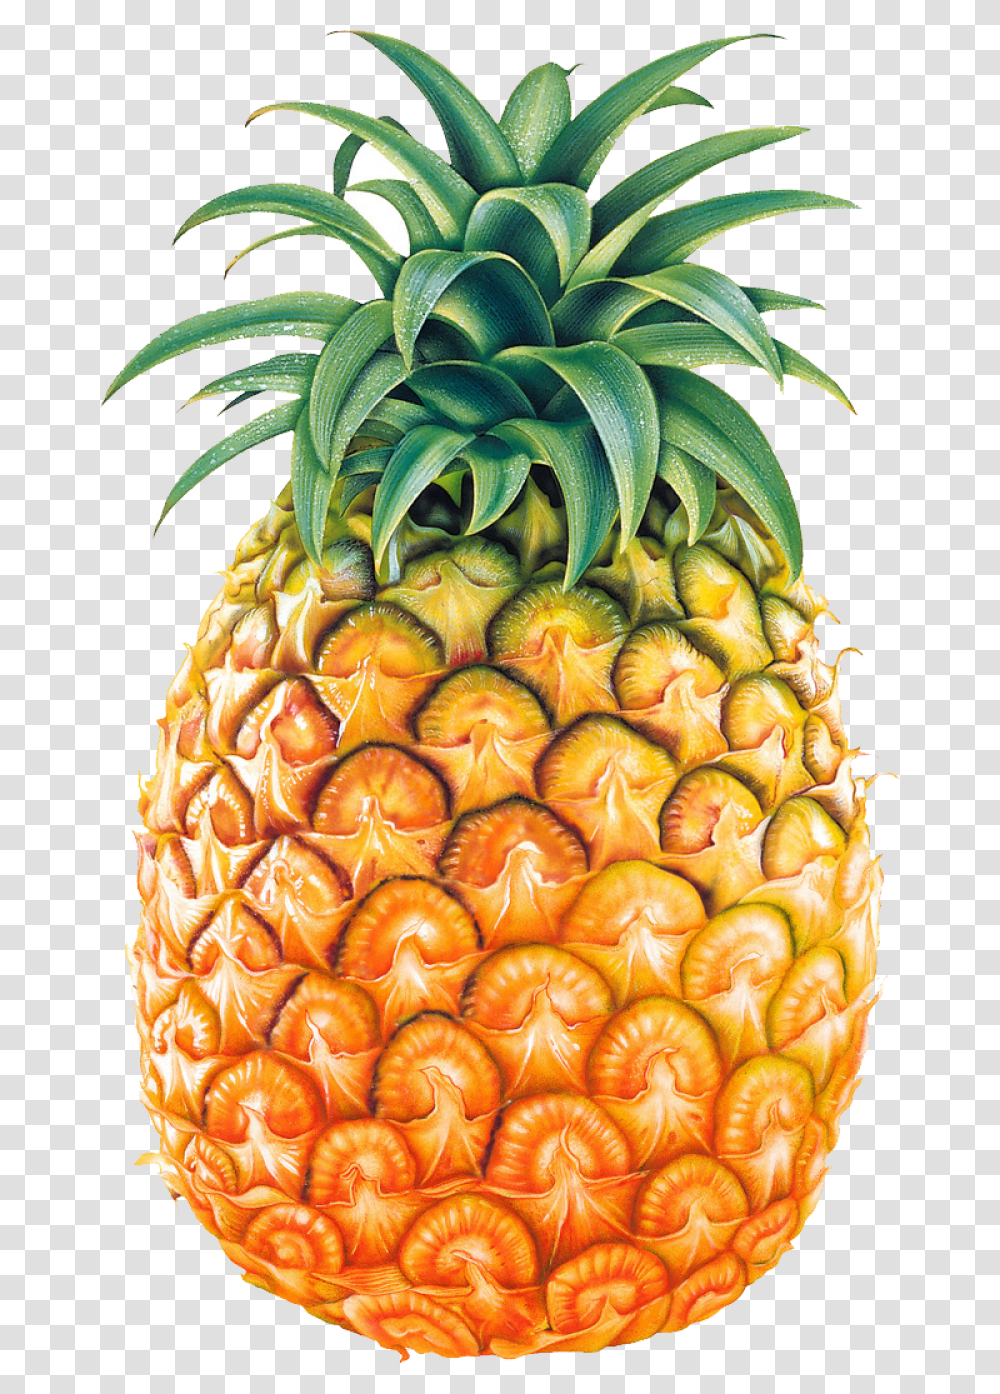 Pineapple Fruit Image Pineapple, Plant, Food Transparent Png